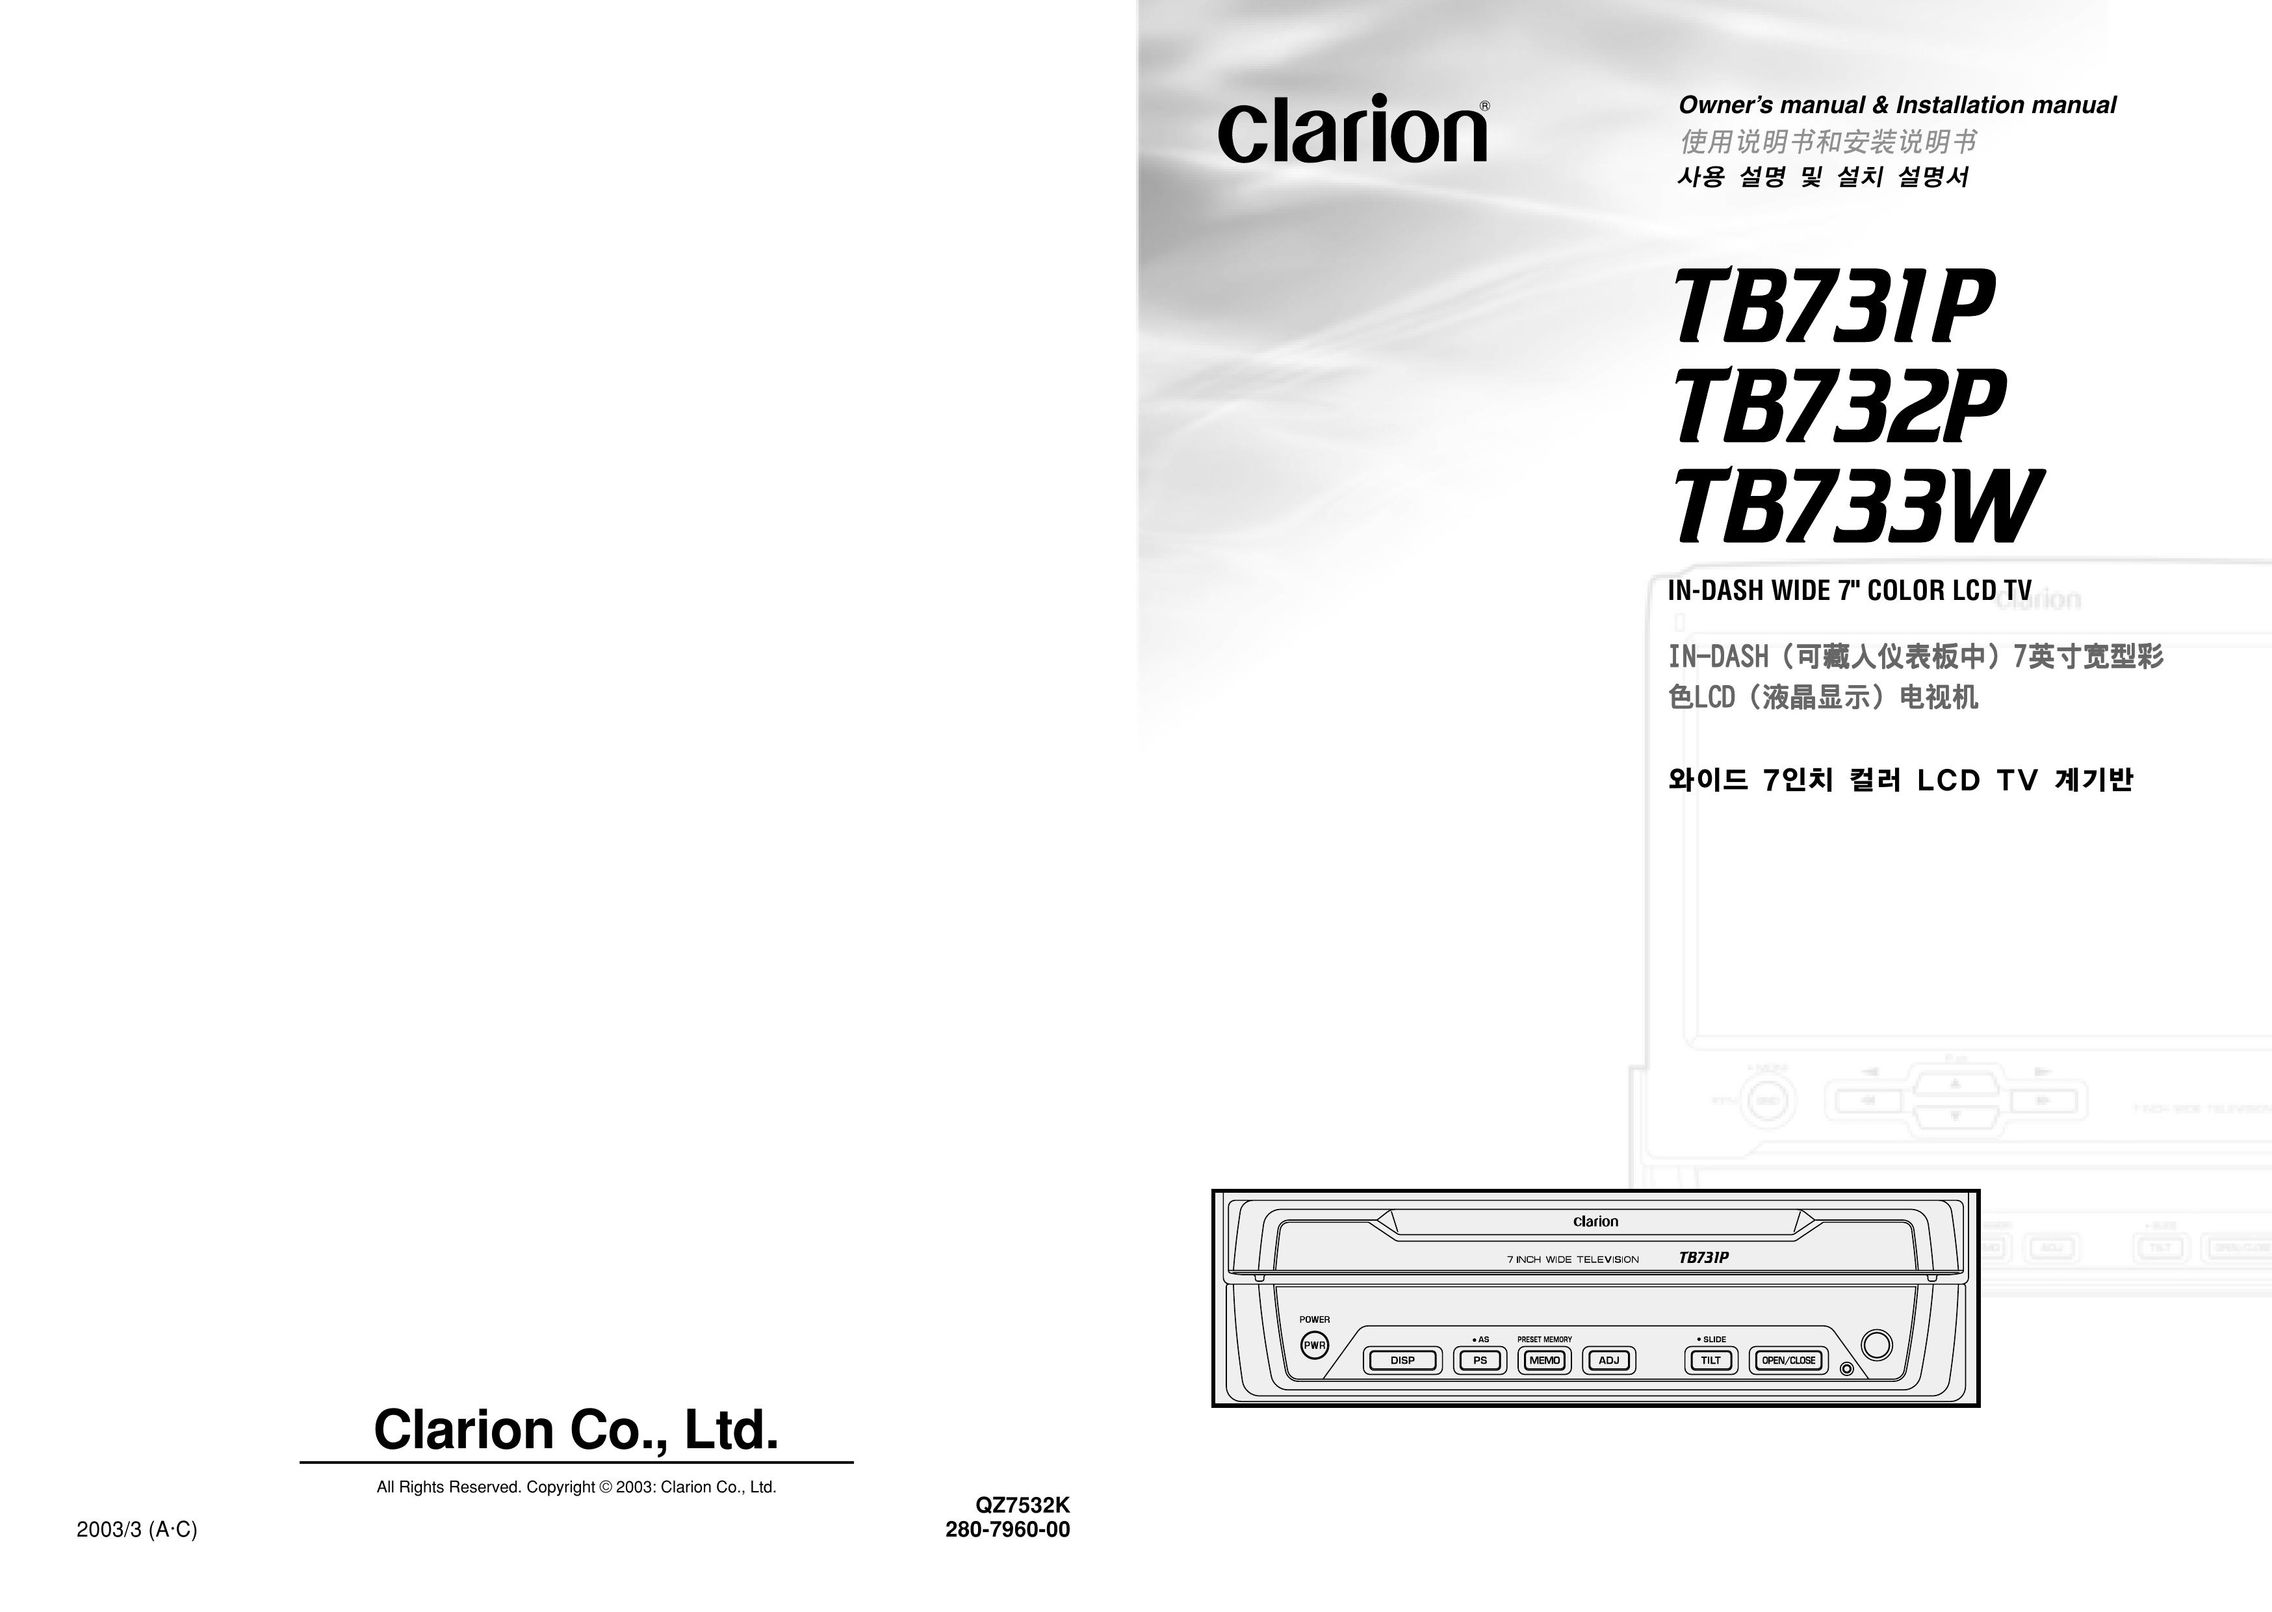 Clarion TB733W Flat Panel Television User Manual